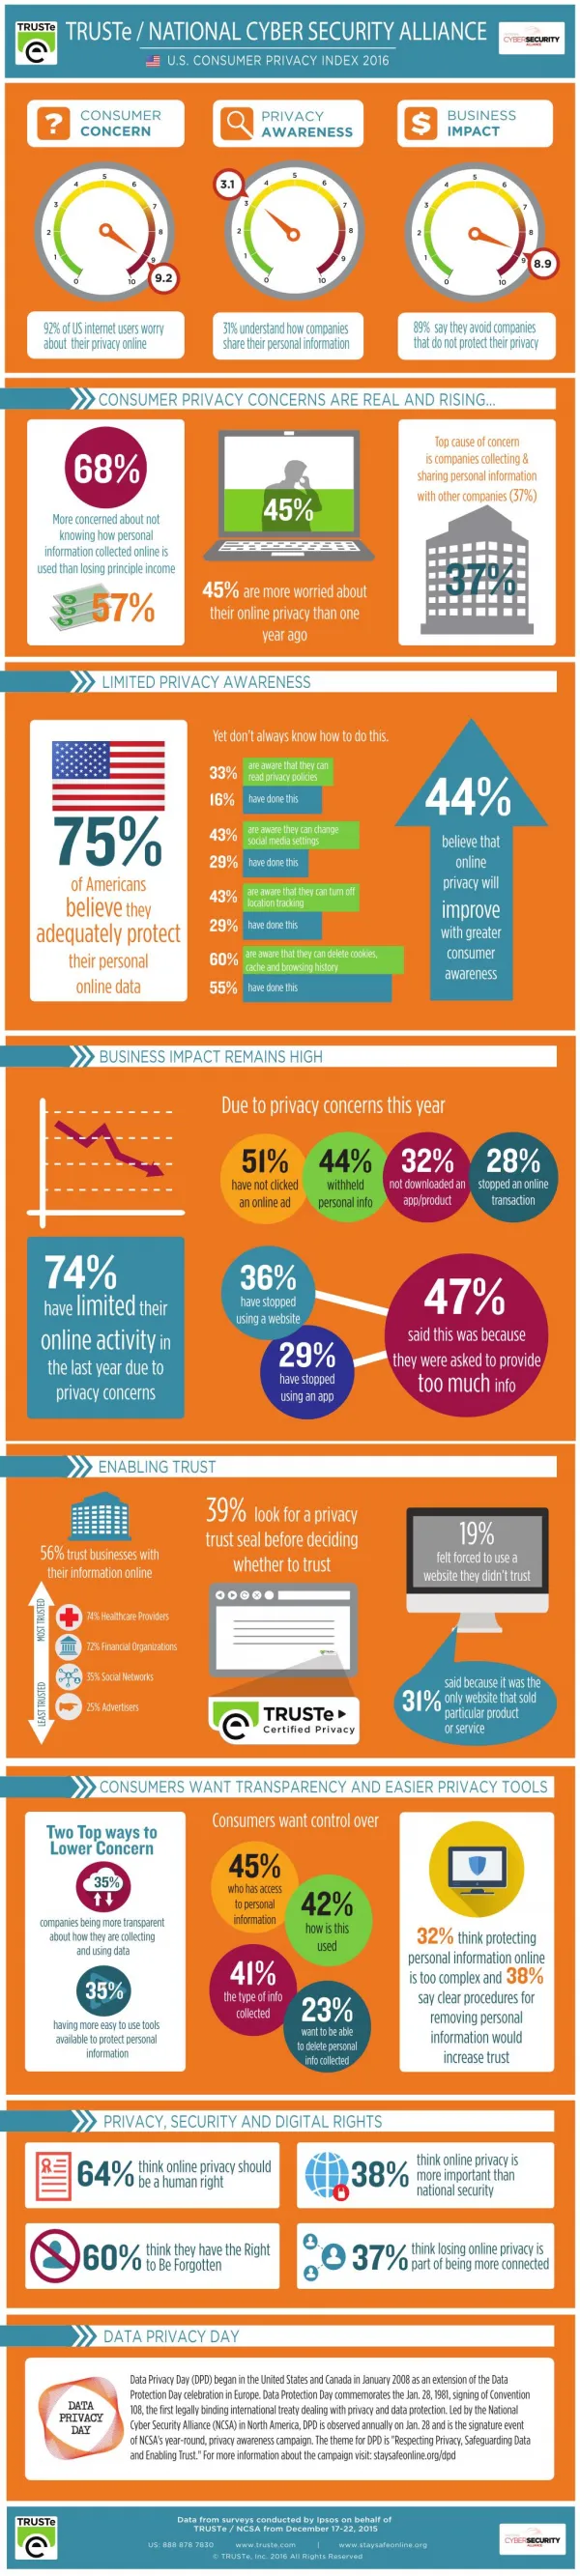 US Consumer Privacy Index 2016 – Infographic from TRUSTe & NCSA